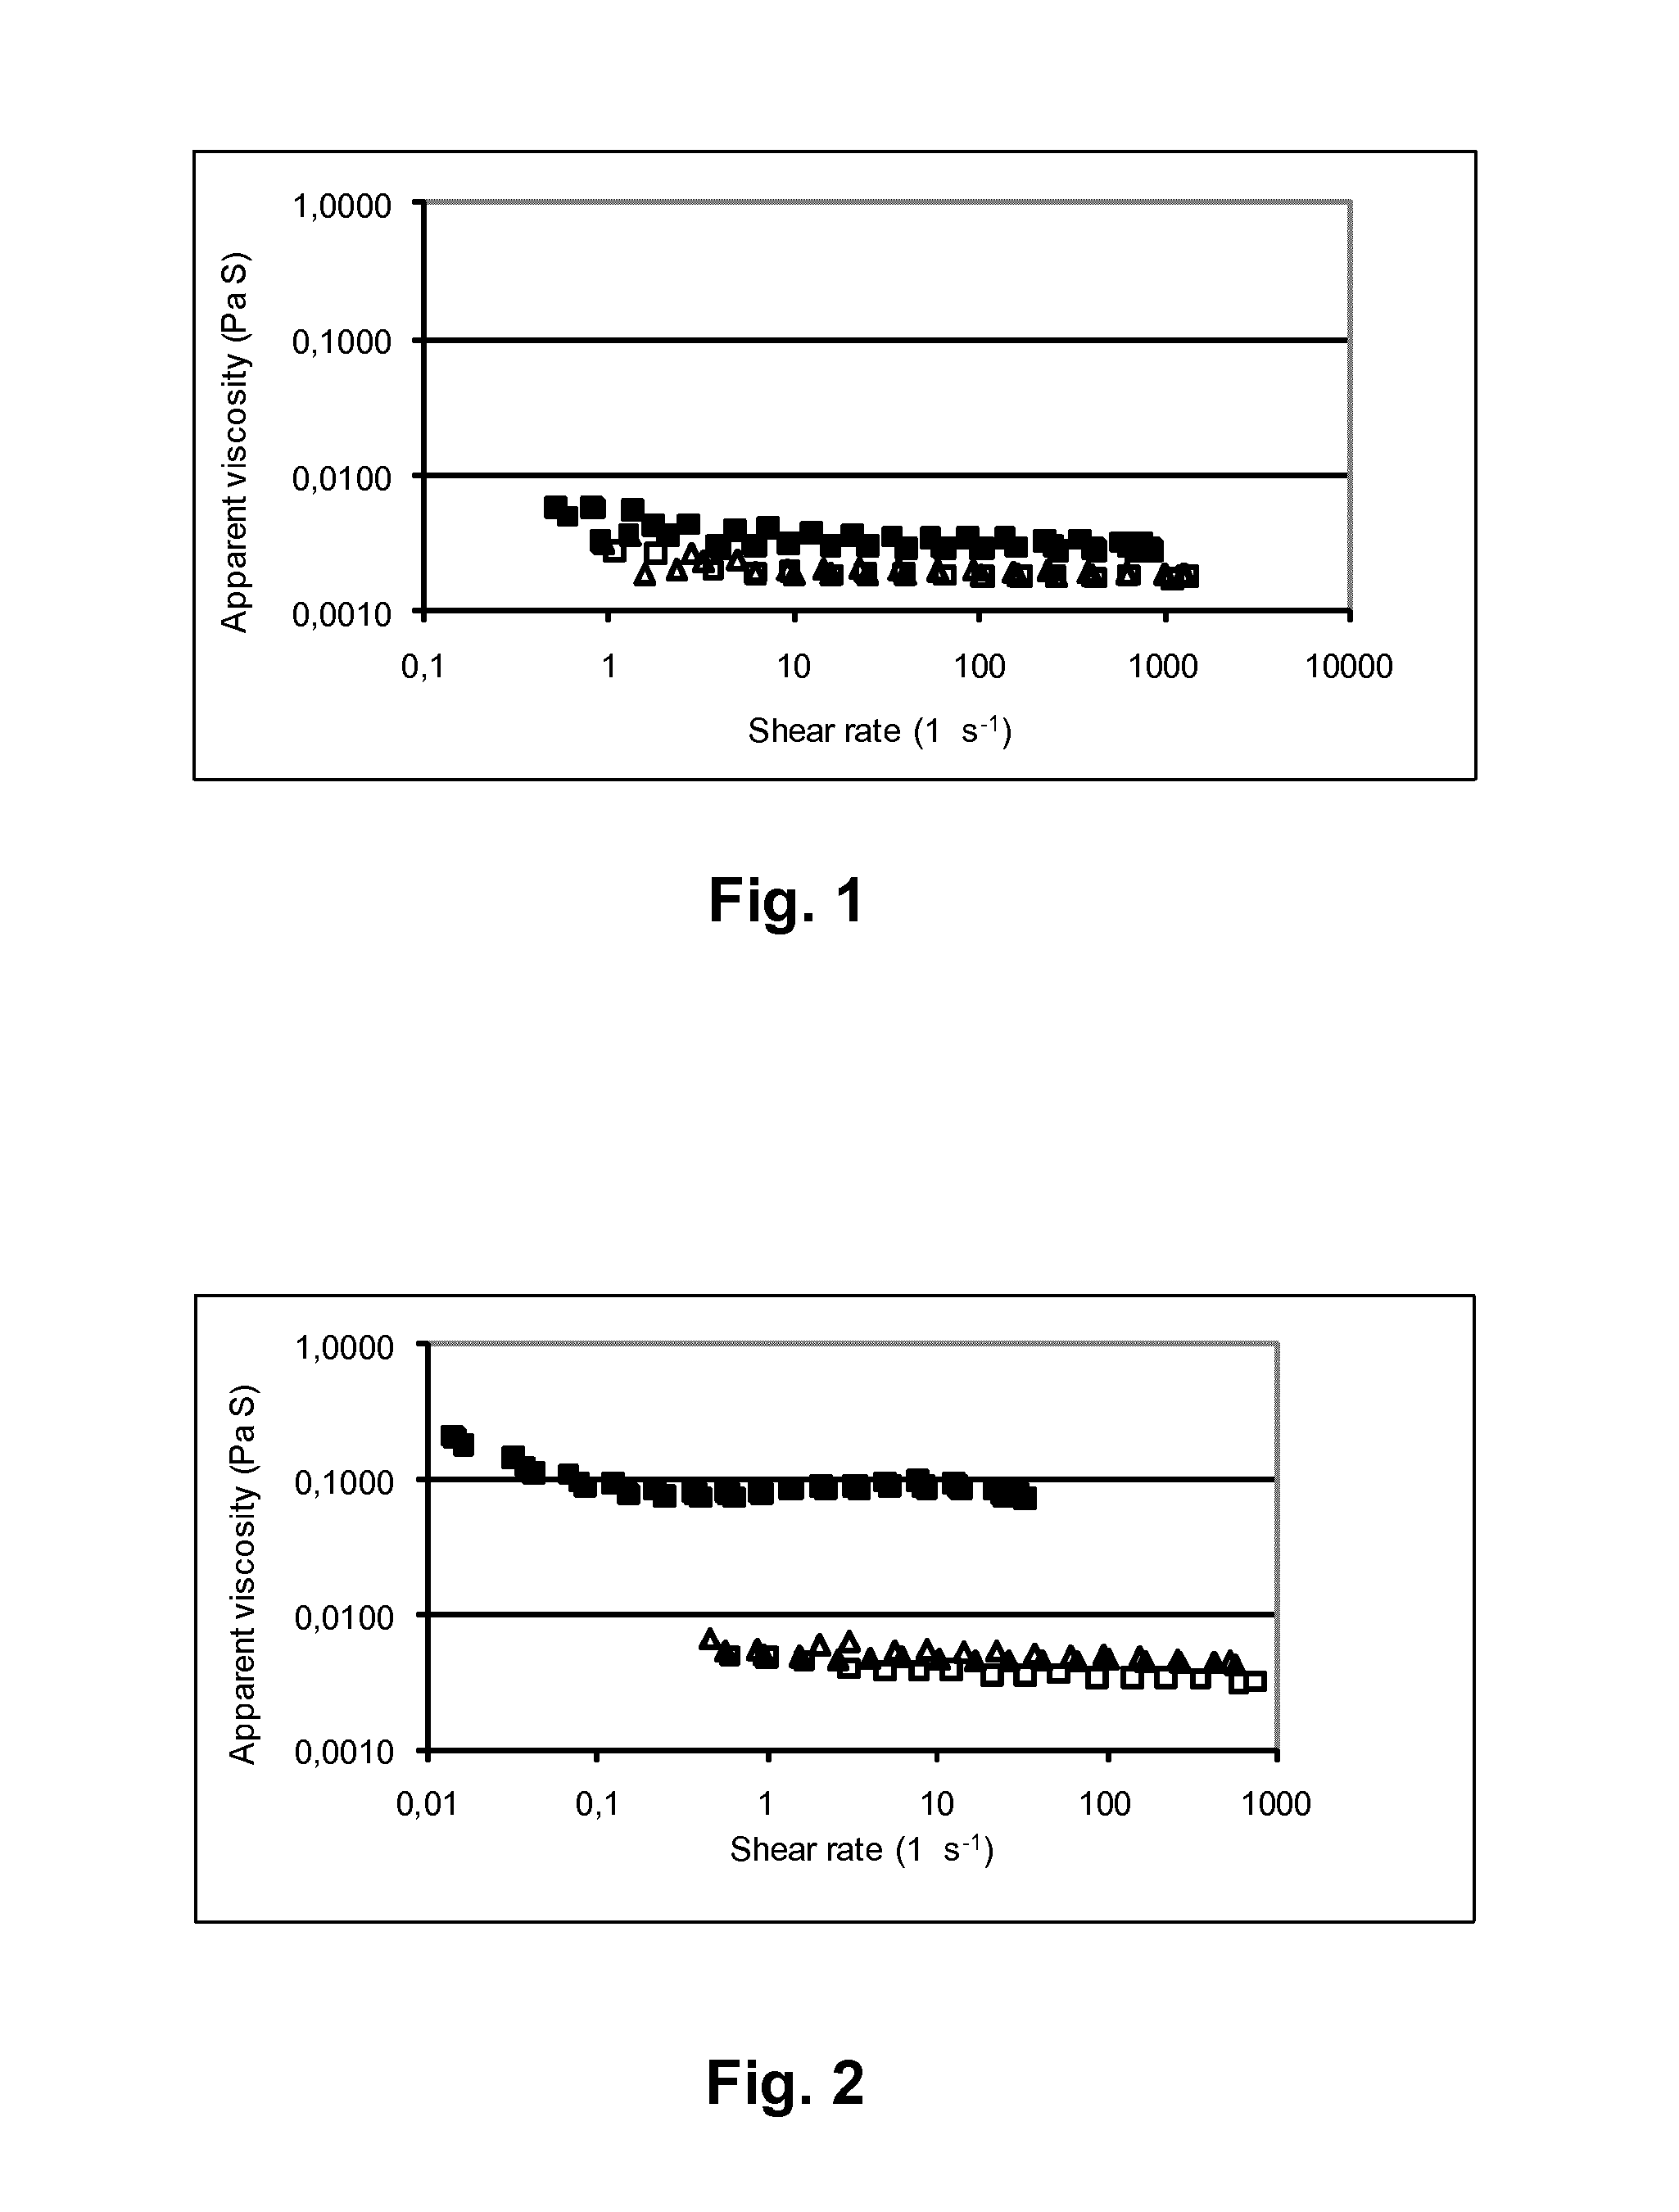 Milk products with increased water binding